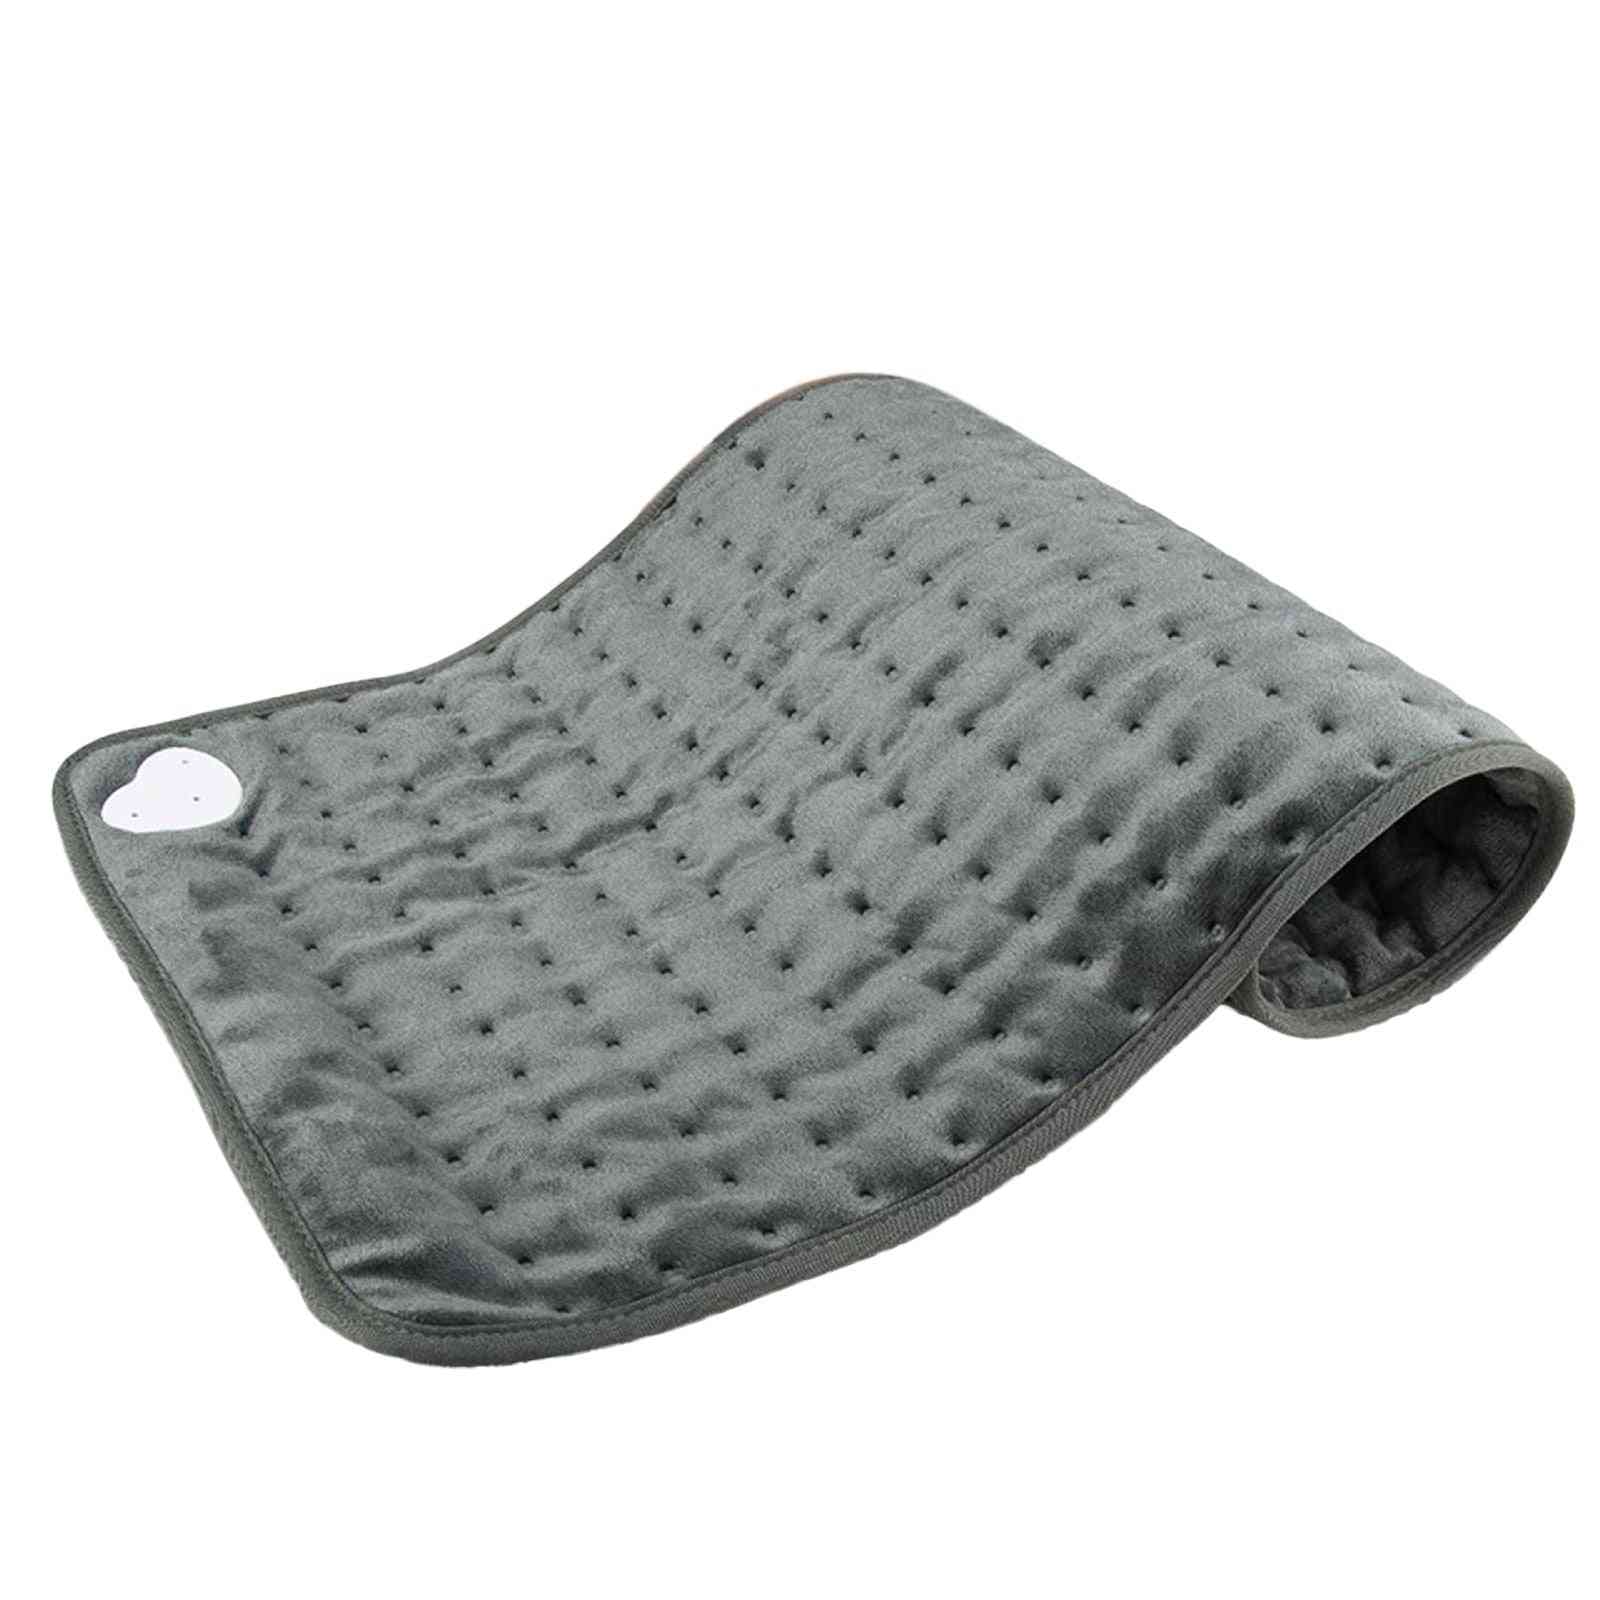 Physiotherapy Heating Pad Electric Blanket